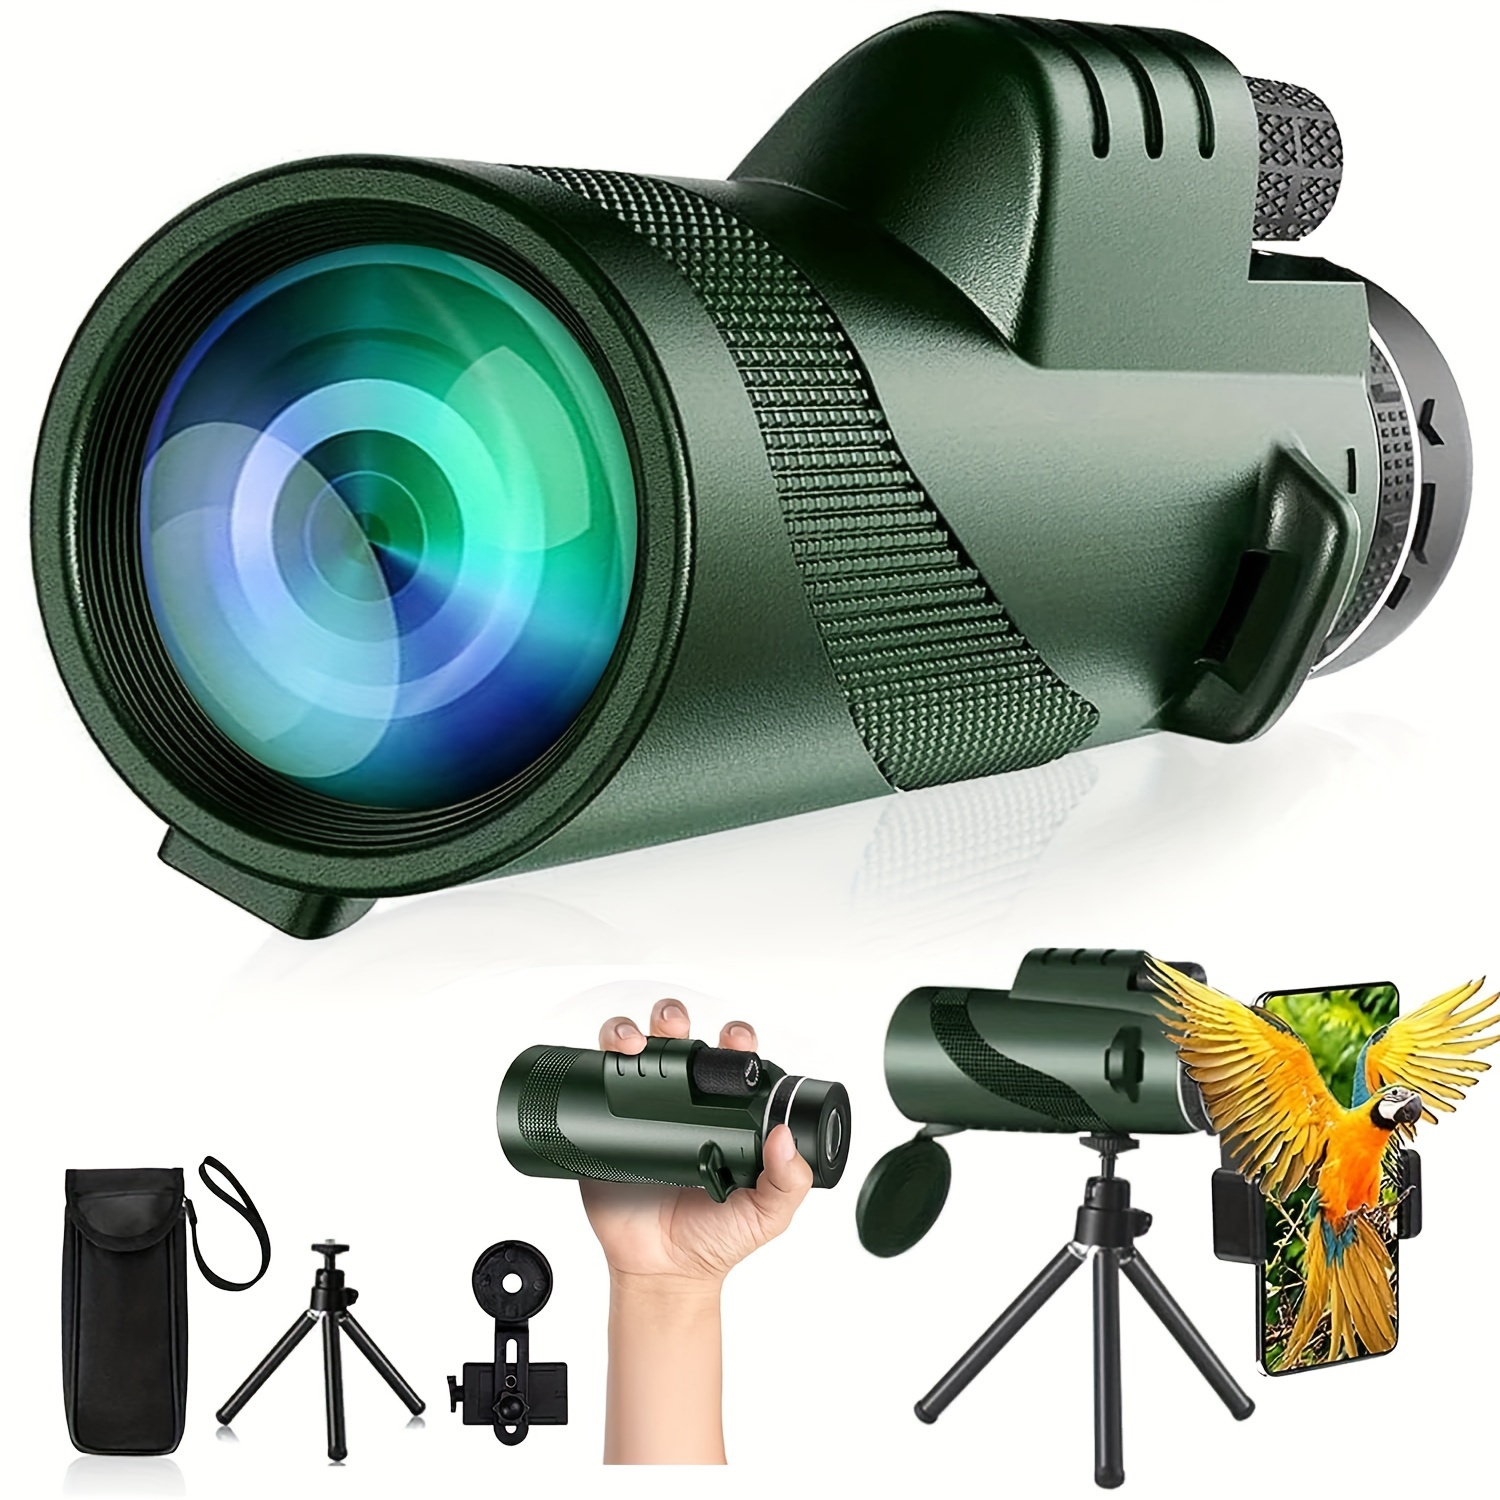 

Monocular Telescope, 80x100 Monocular With Smartphone Holder & Tripod, Compact Portable Monocular With Hand Strap, Lightweight Telescope For Adults For Wildlife Bird Watching, Hunting, Camping, Travel